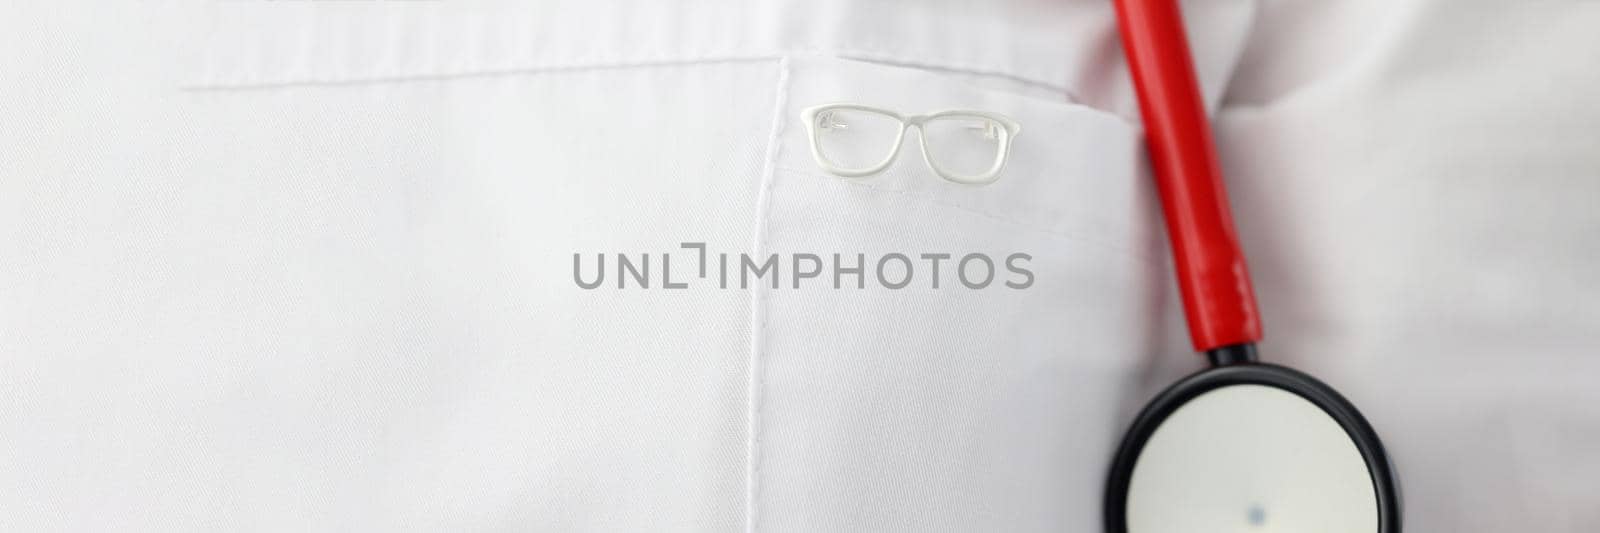 Eyeglass shape icon hanging on ophthalmologist gown closeup by kuprevich